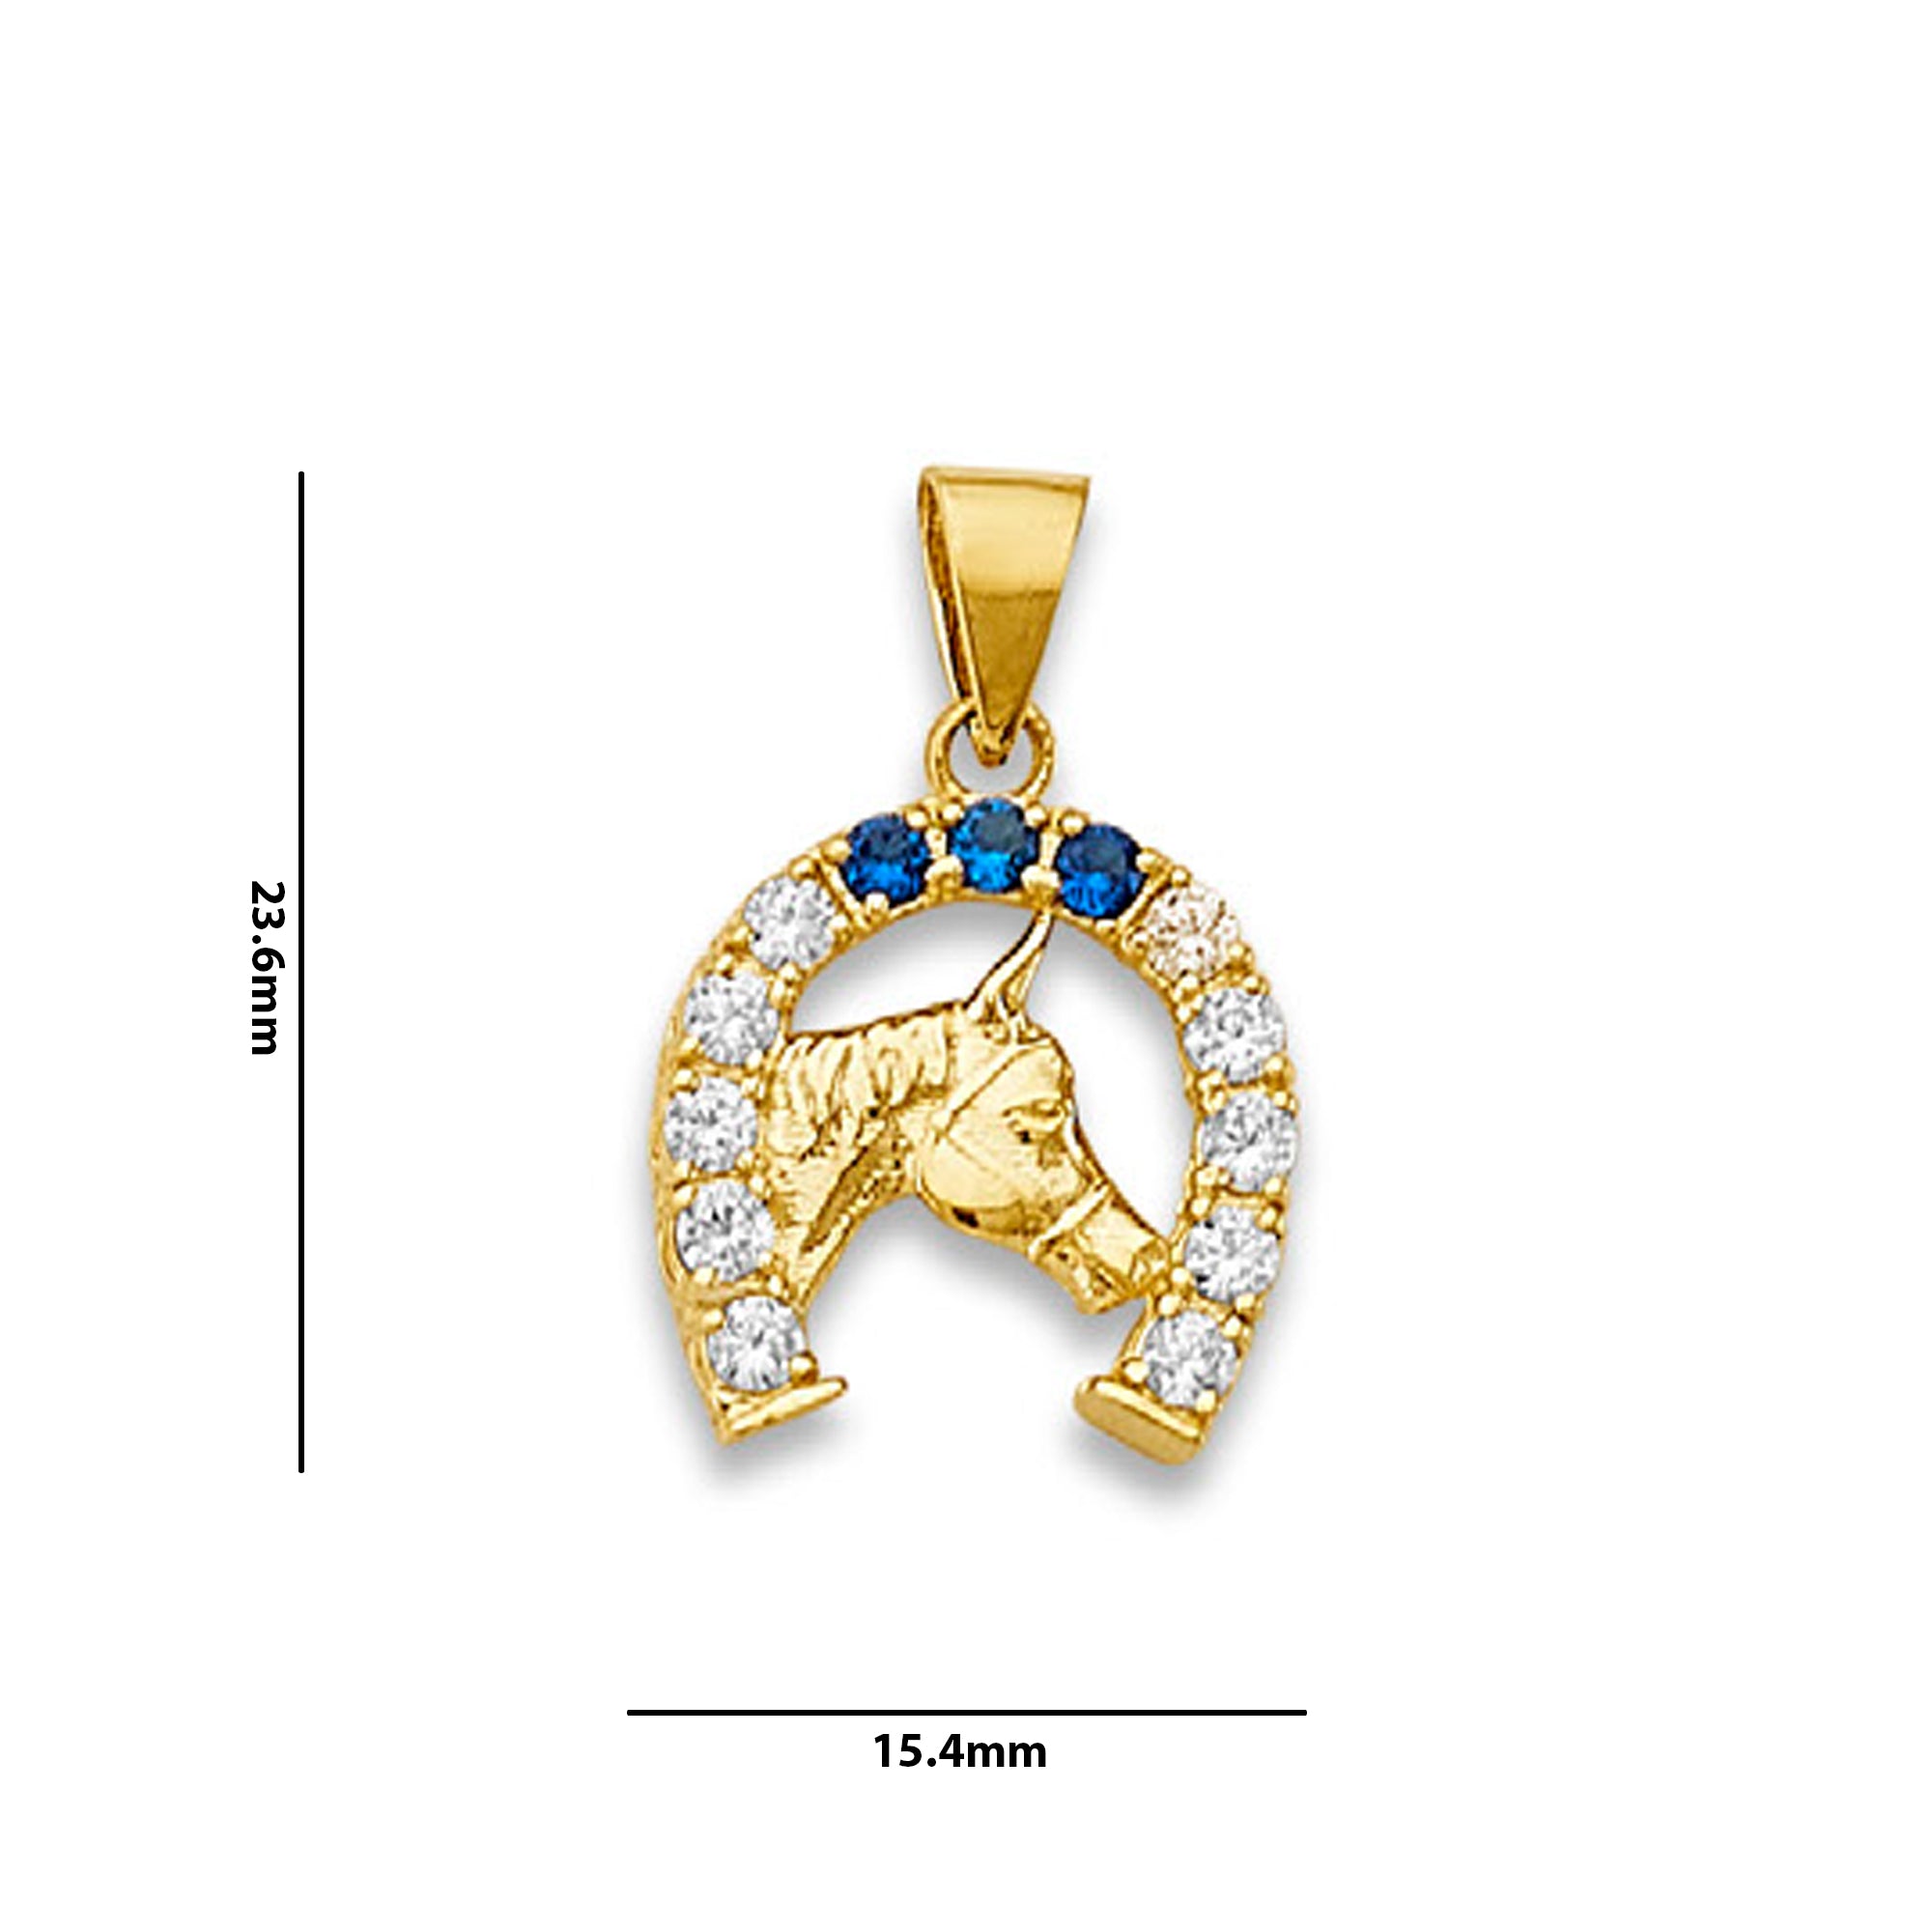 Yellow Gold Round Blue and White CZ Horsehead Horseshoe Charm Pendant with Measurement